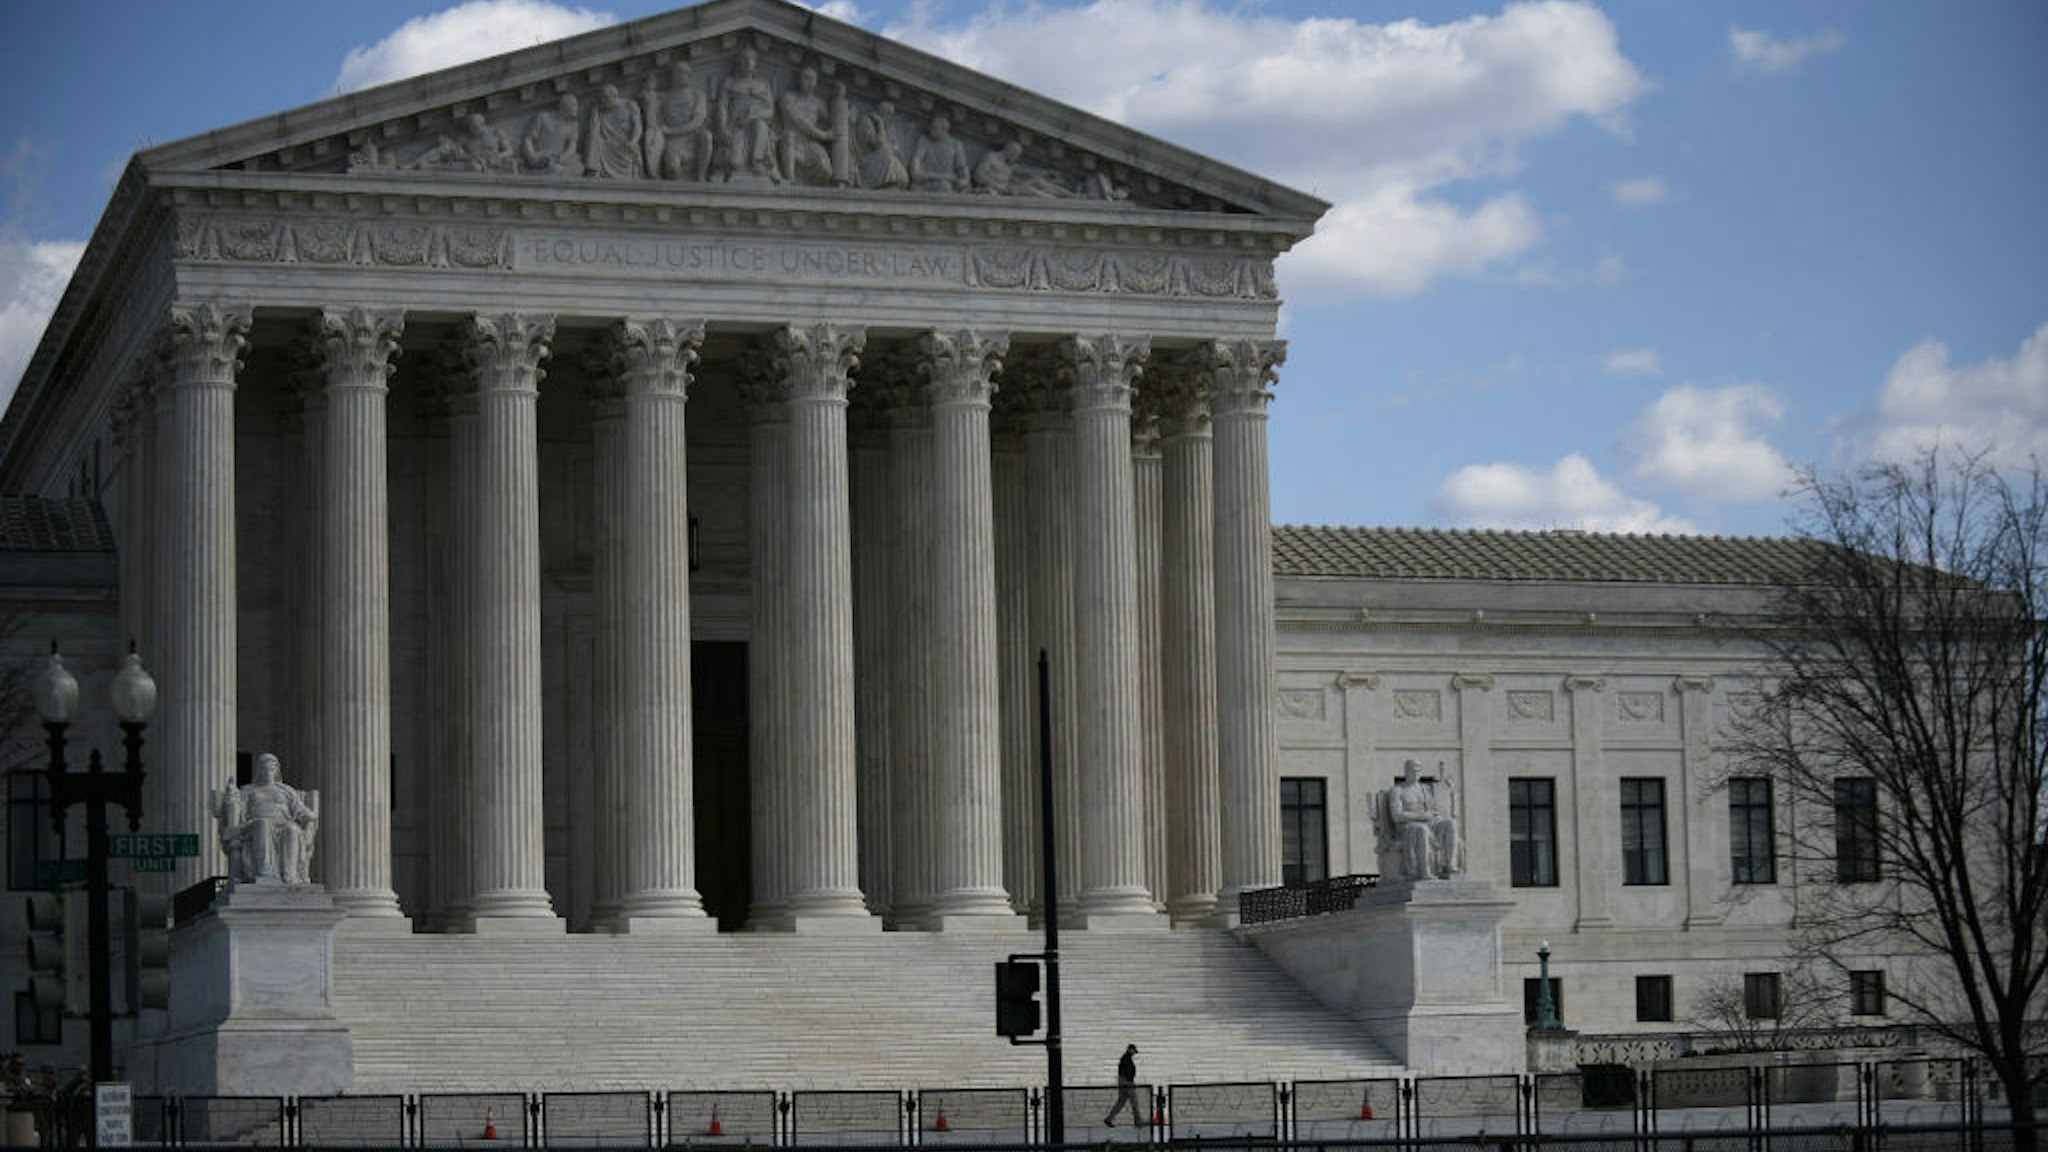 Security is tight around the US Supreme Court and the US Capitol building in Washington, D.C., March 4, 2021.